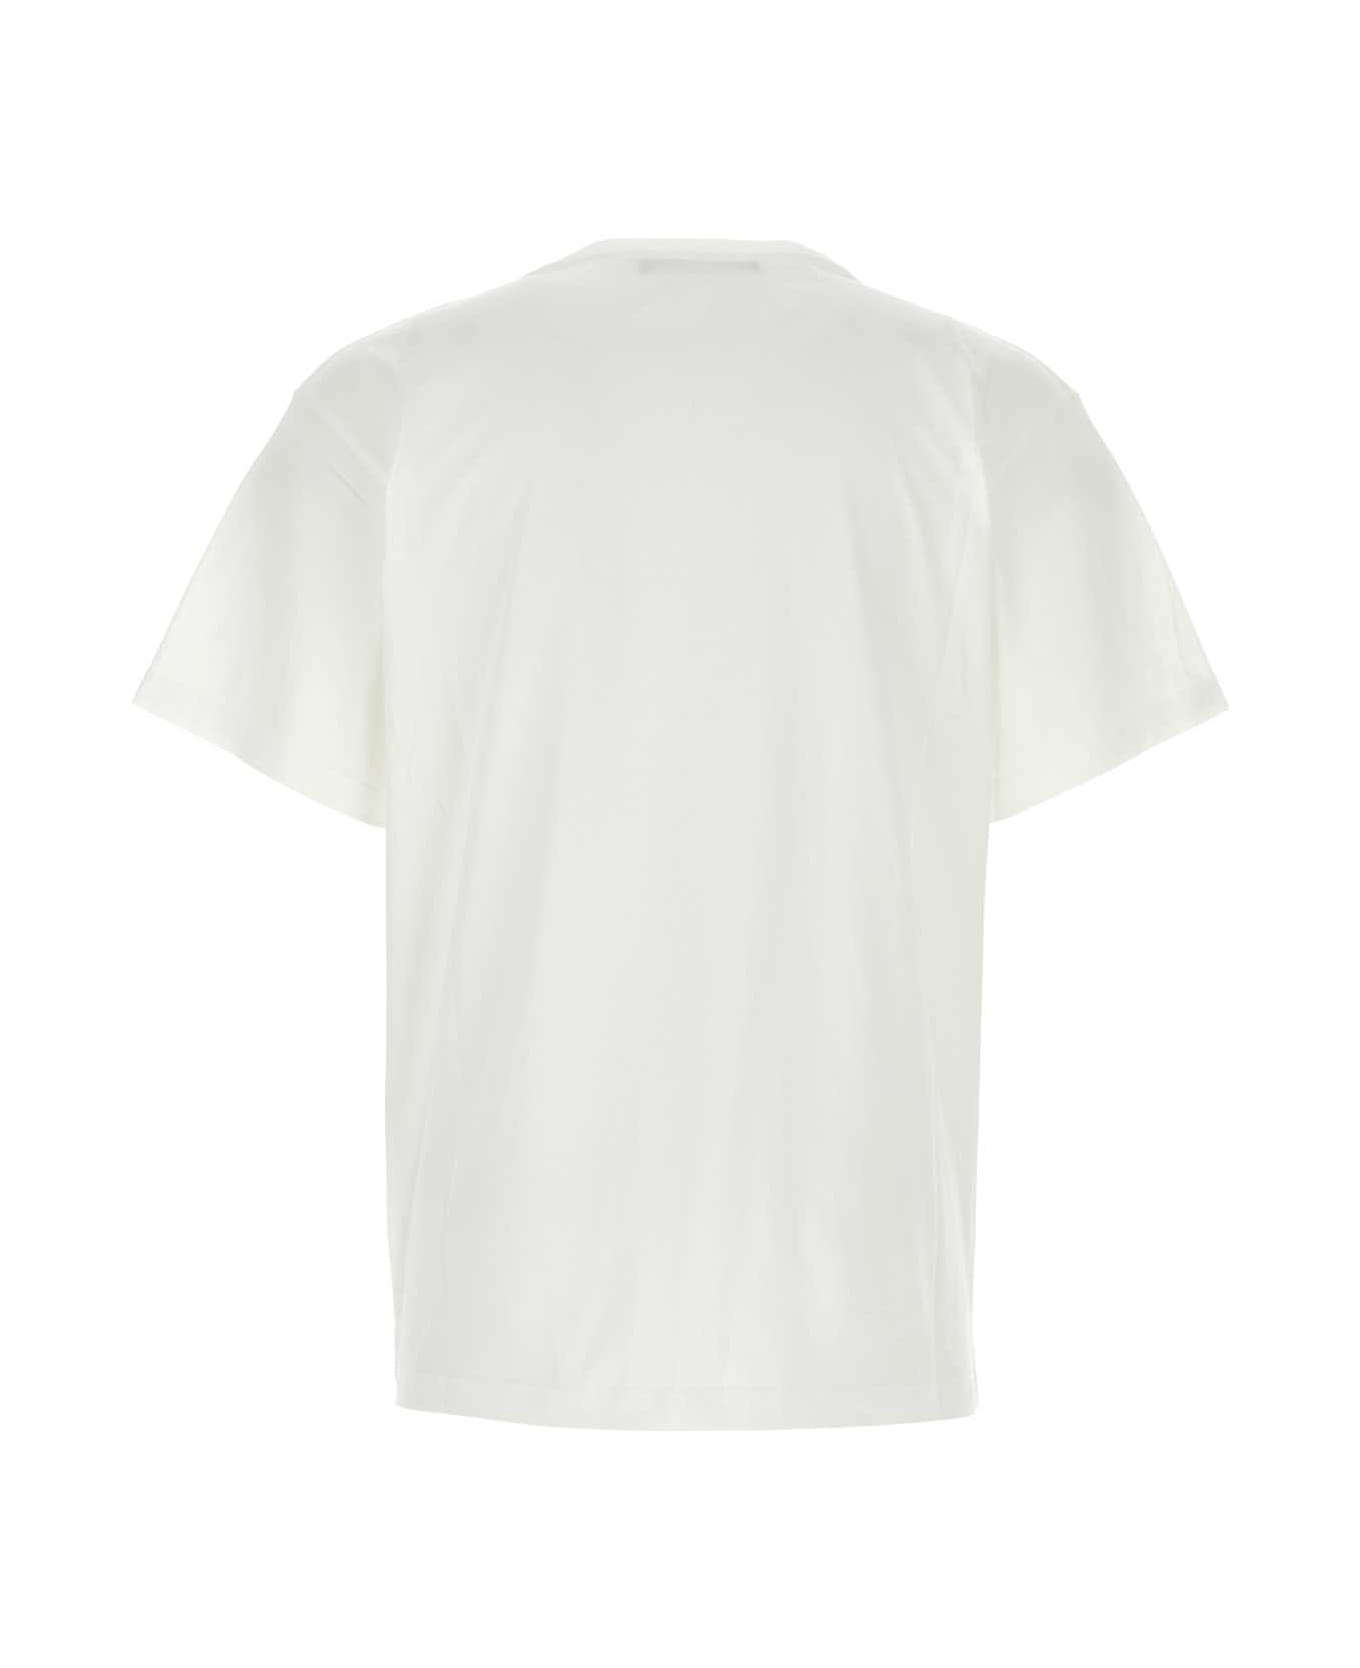 Y/Project White Cotton T-shirt - OPTIC WHITE シャツ